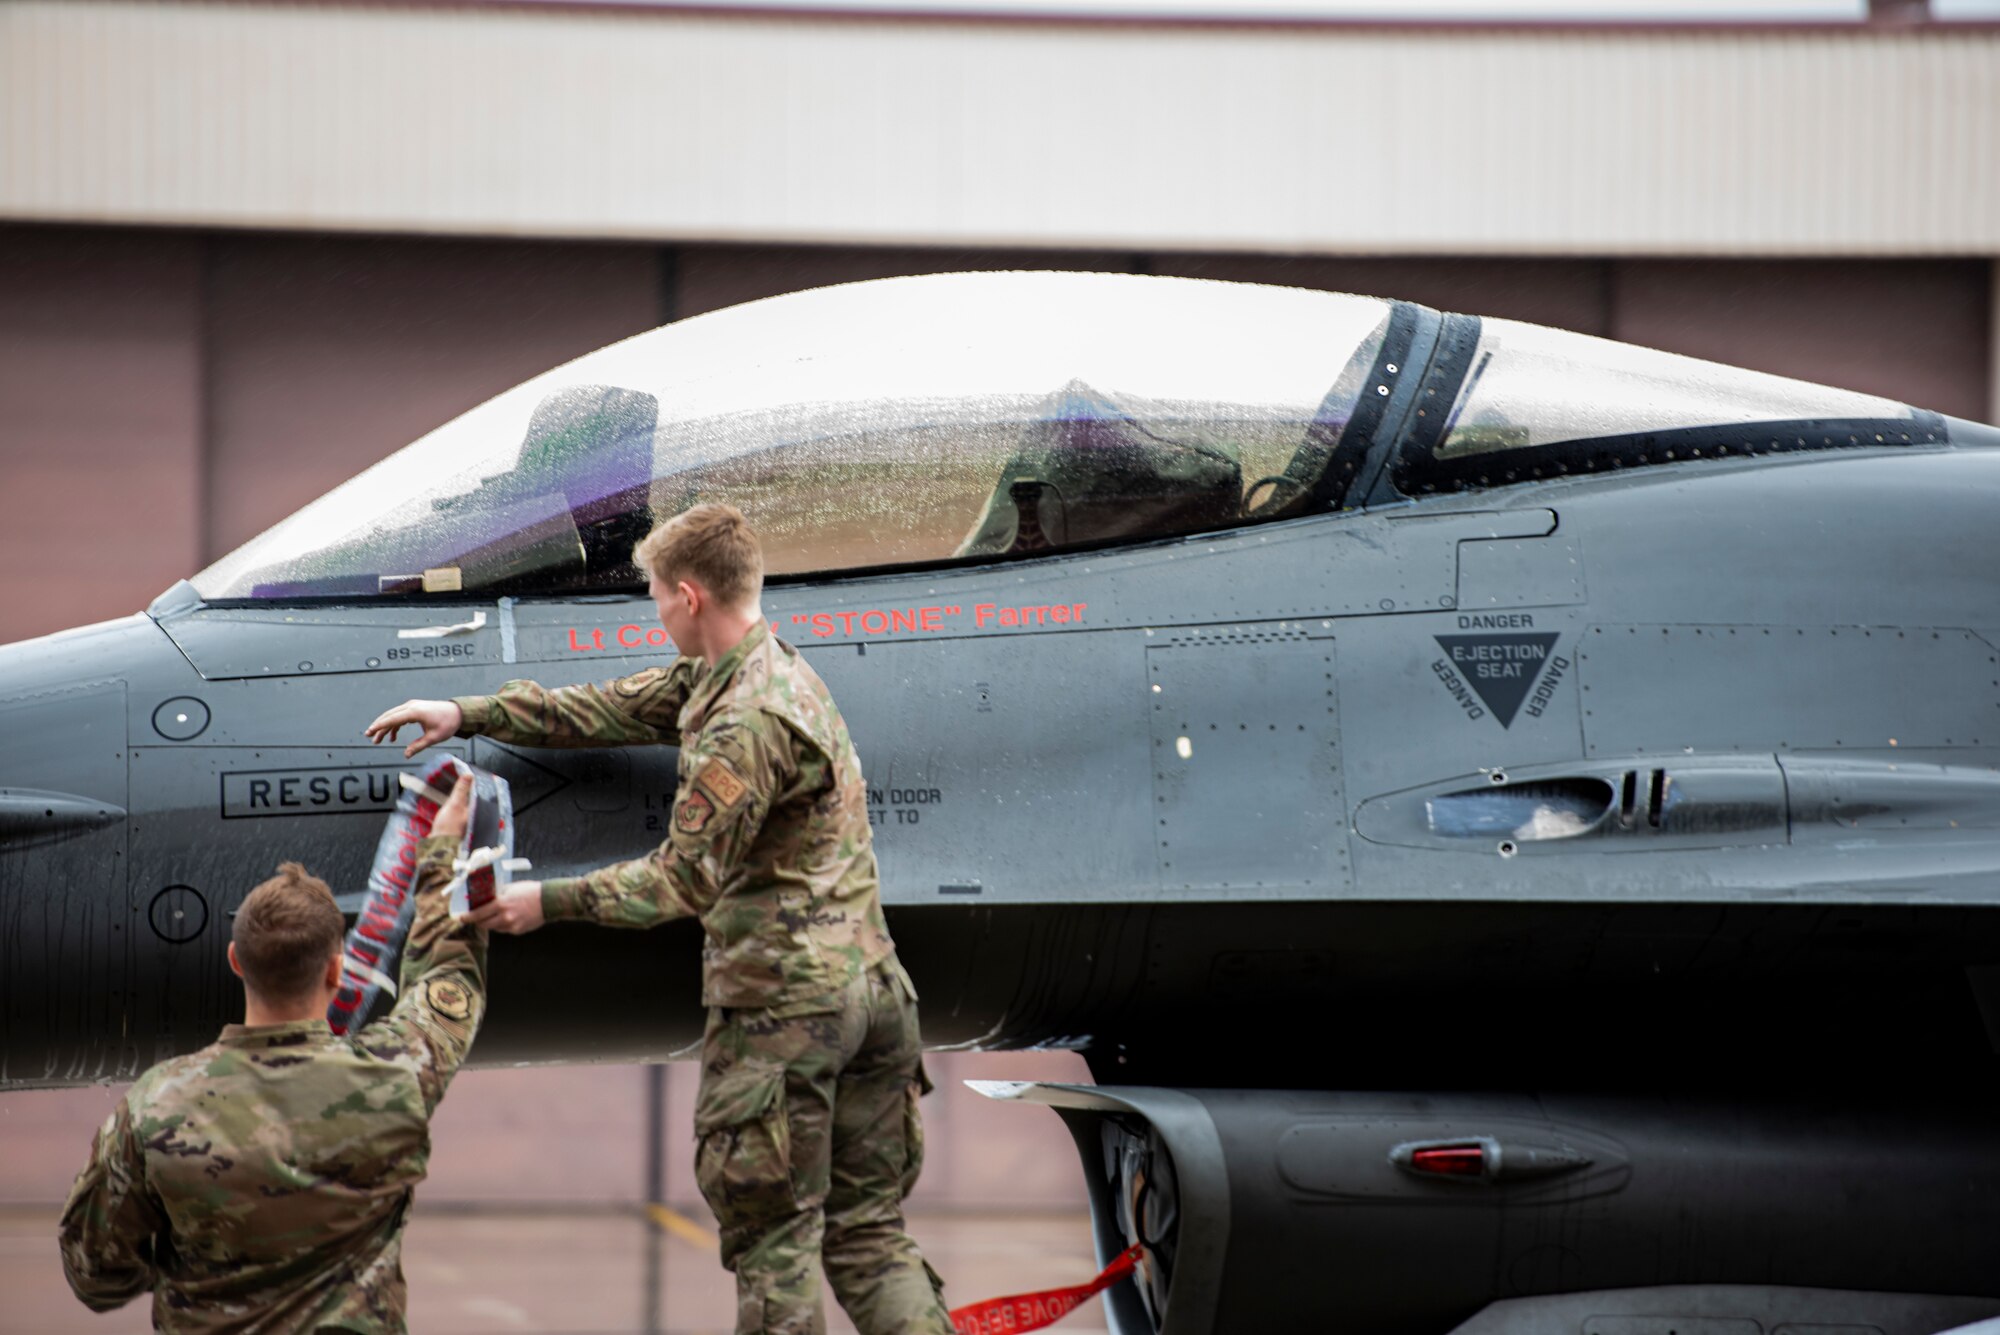 Airmen assigned to the 36th Fighter Squadron reveal a name tape on an F-16 Fighting Falcon for Lt. Col. Cory Farrer, newly appointed 36th Fighter Squadron commander, at Osan Air Base, Republic of Korea, June 30, 2022.